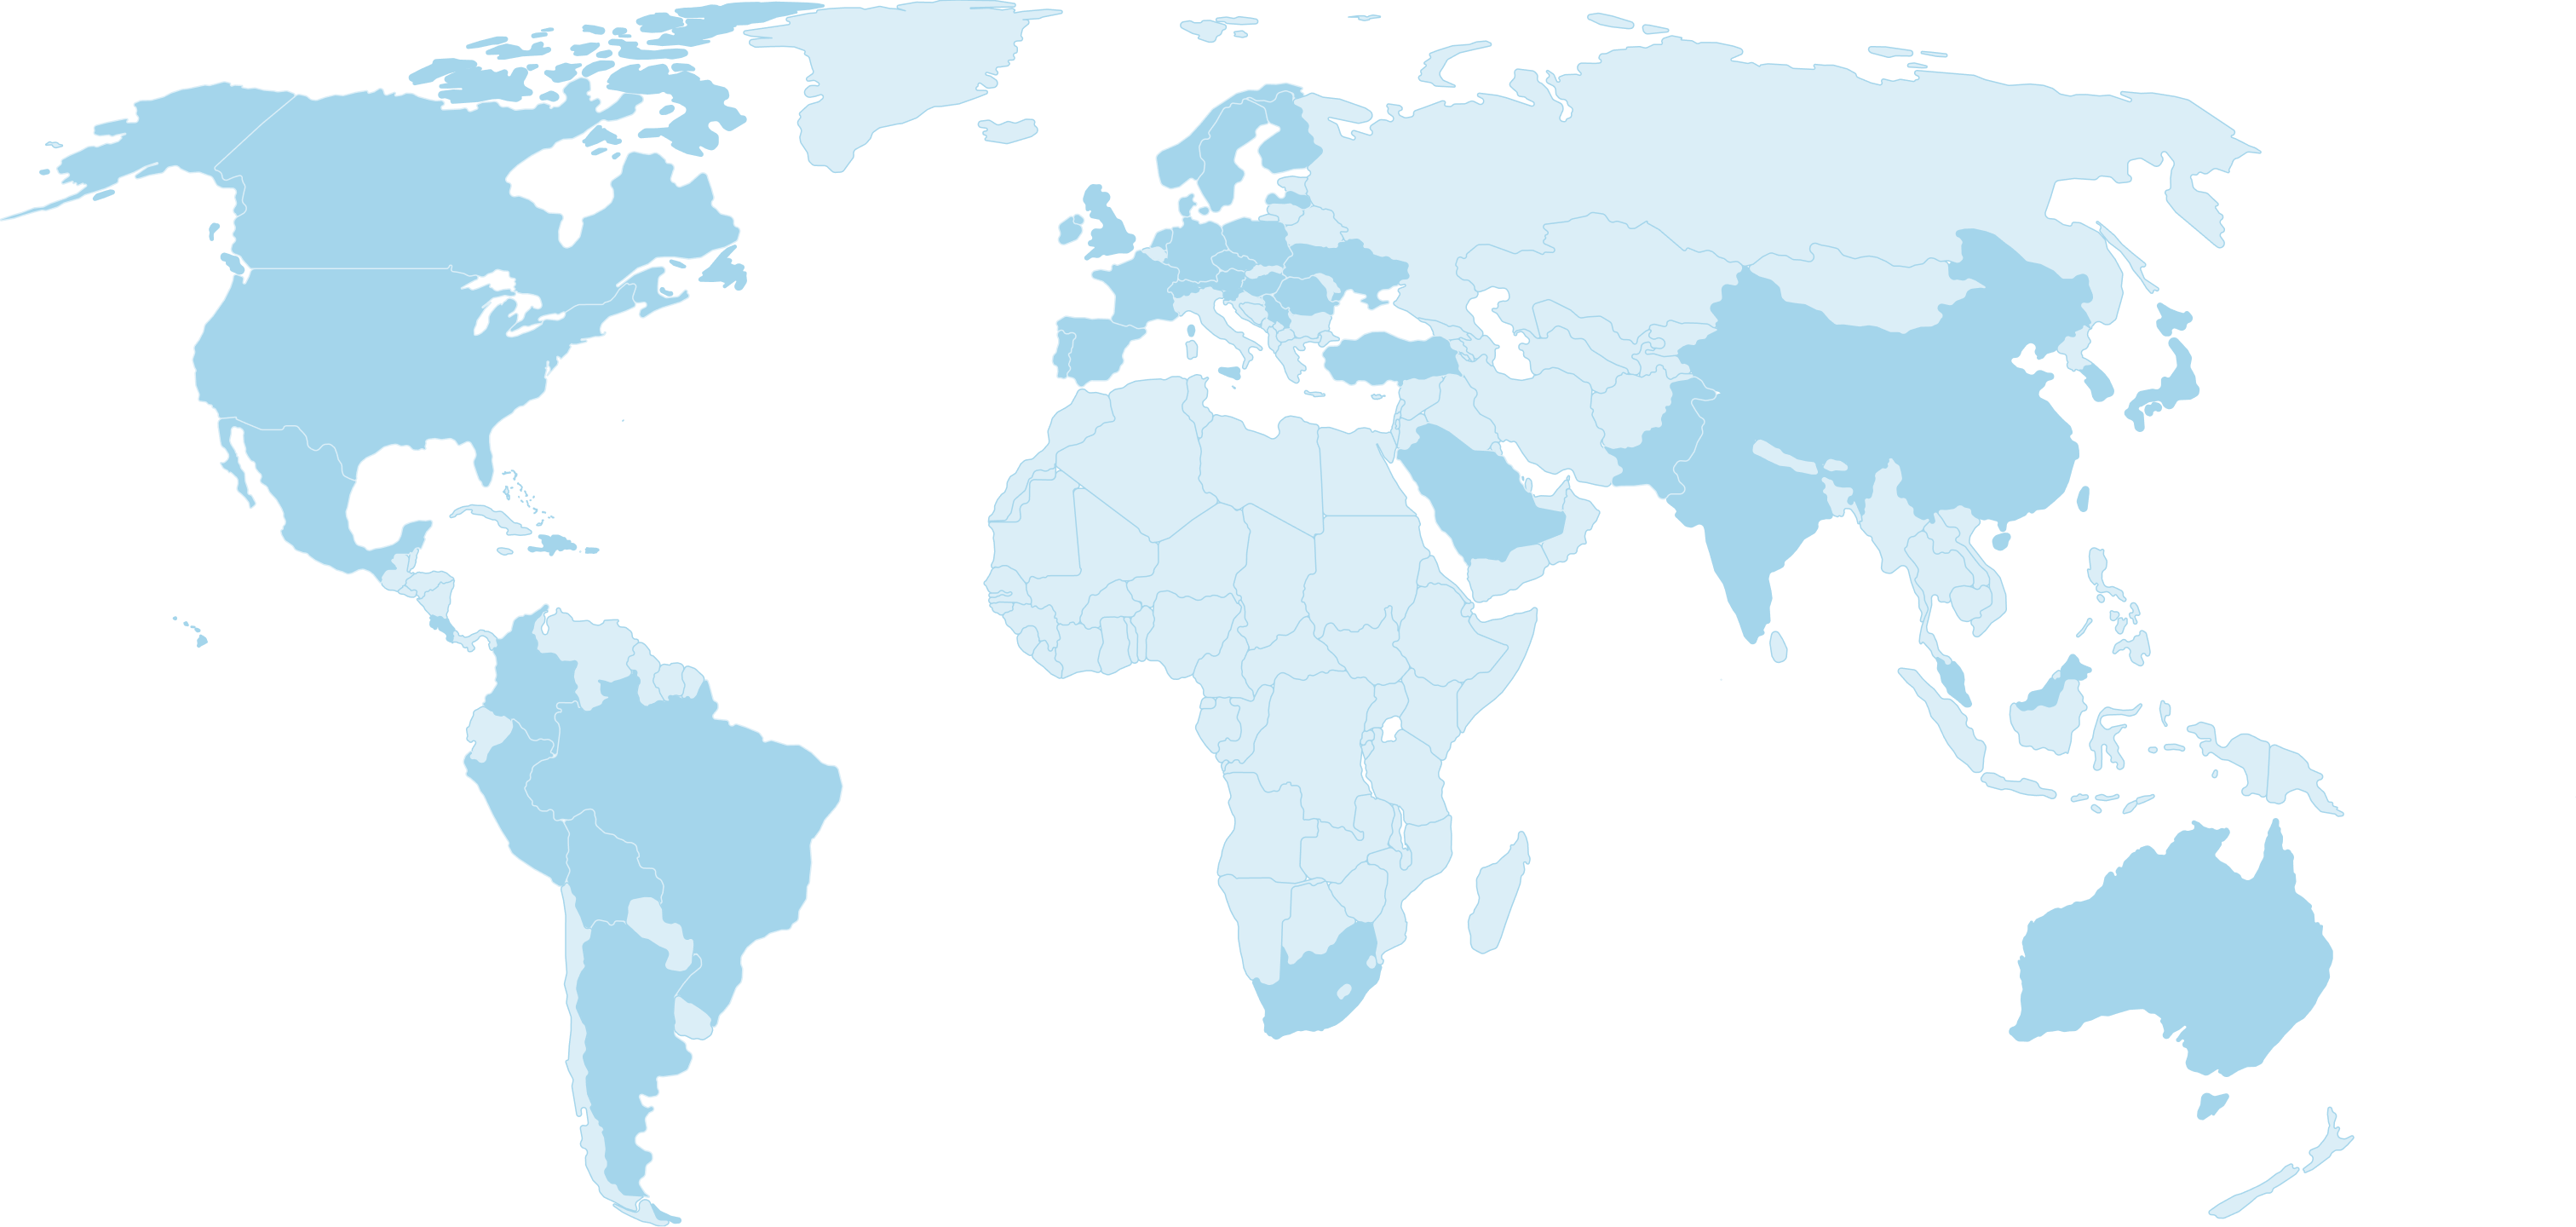 Map of the world showing all countries with Scrum Alliance certified providers